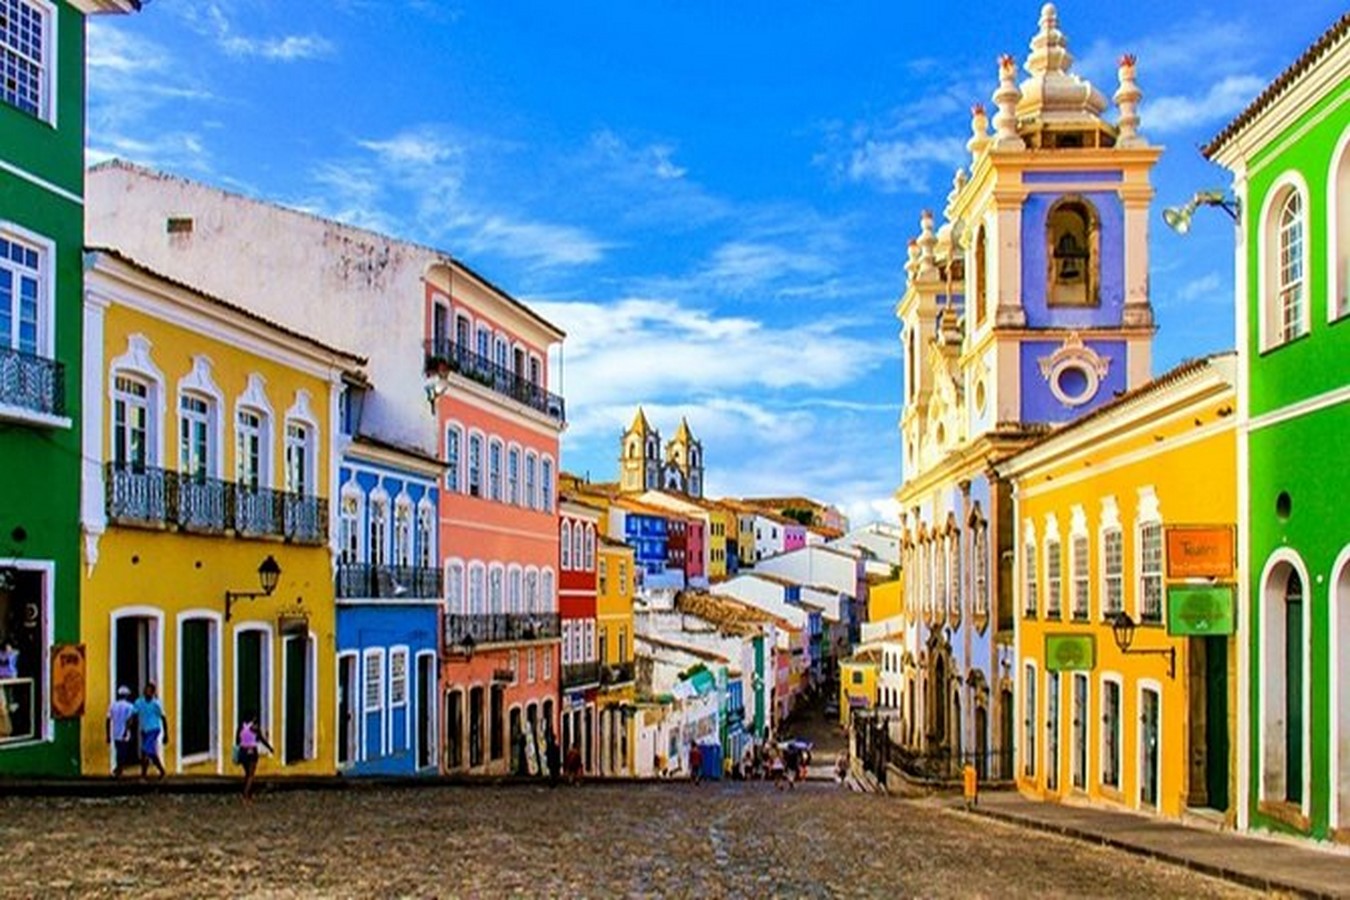 Architecture of Cities: Salvador- The Vibrant City - Sheet1